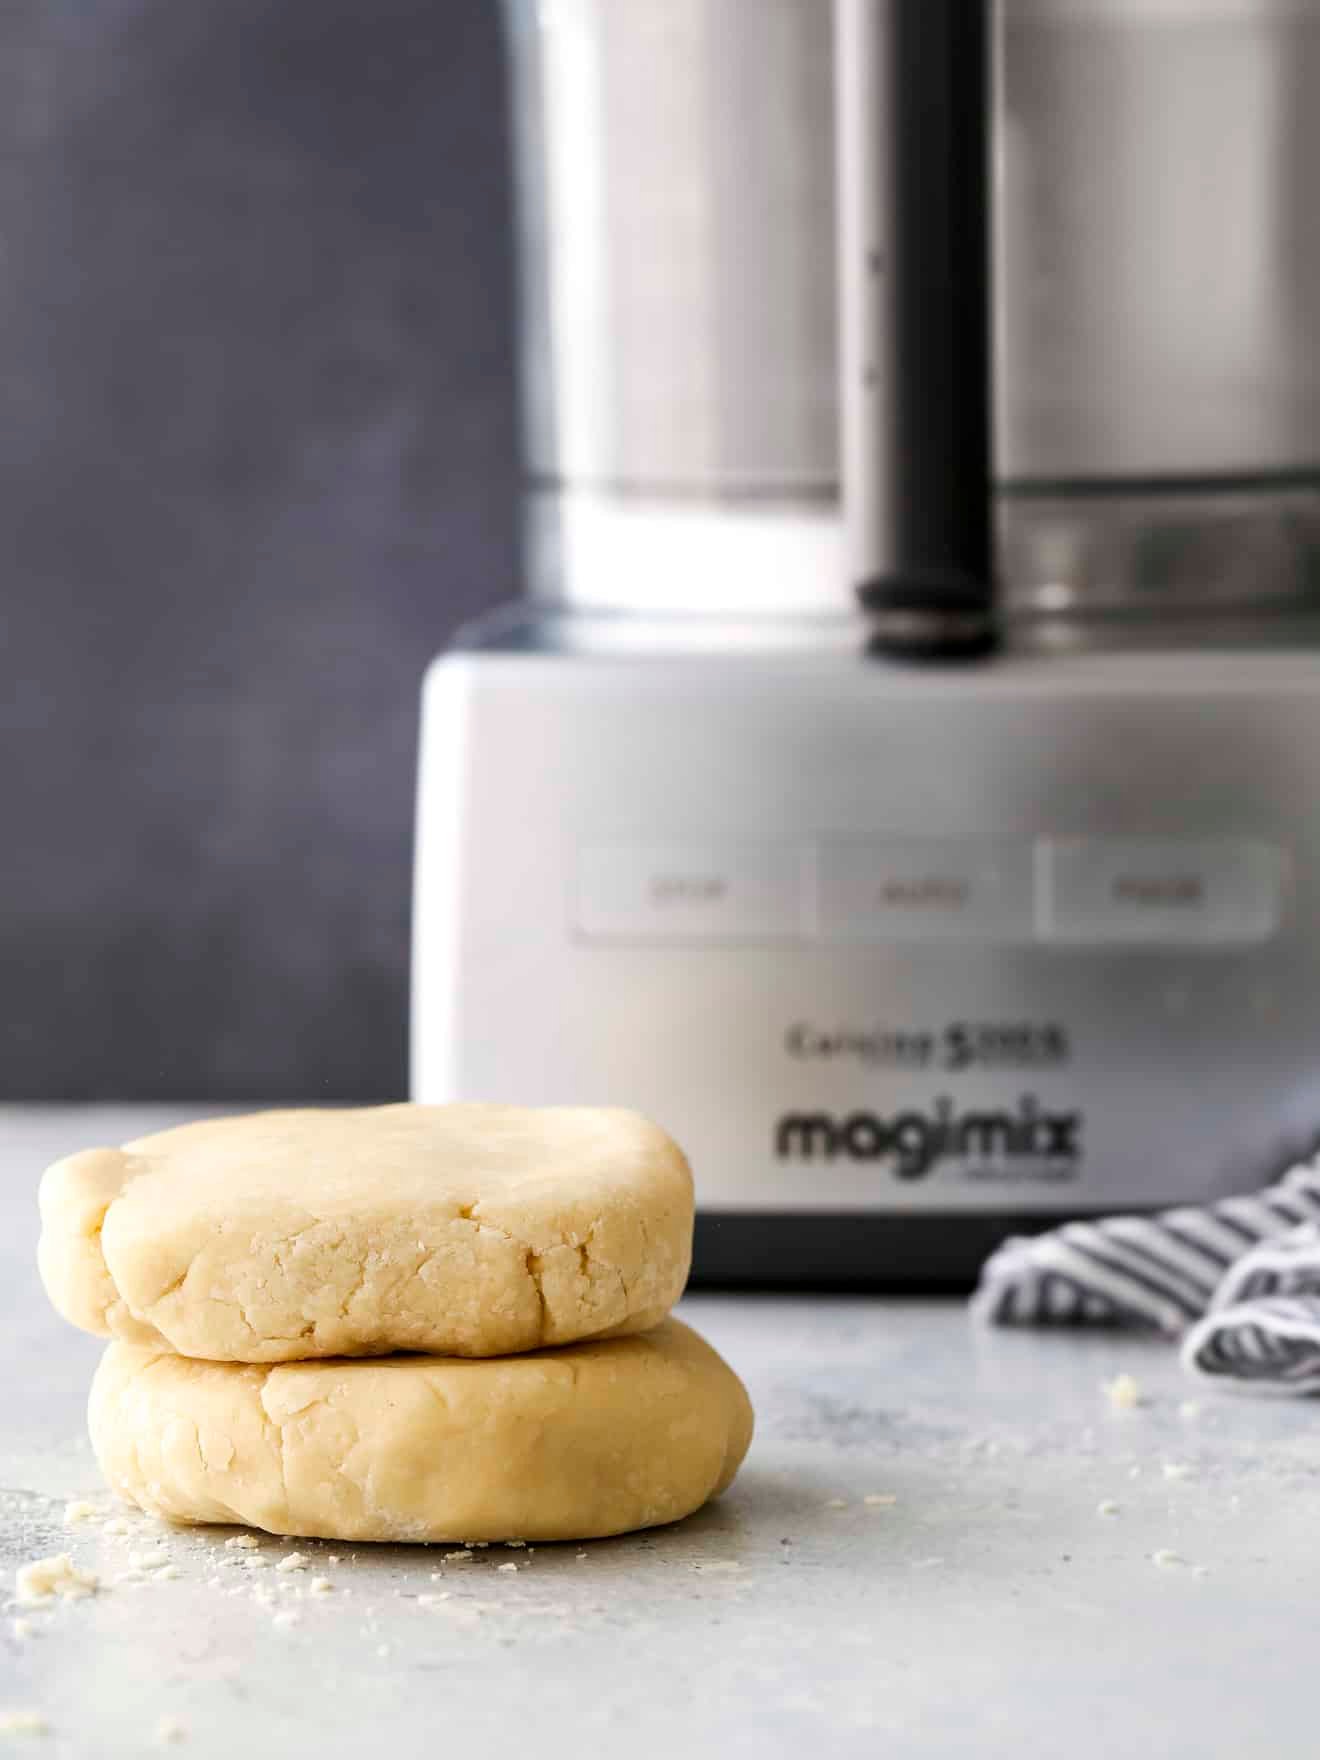 6 top-rated food processors for cooking and baking